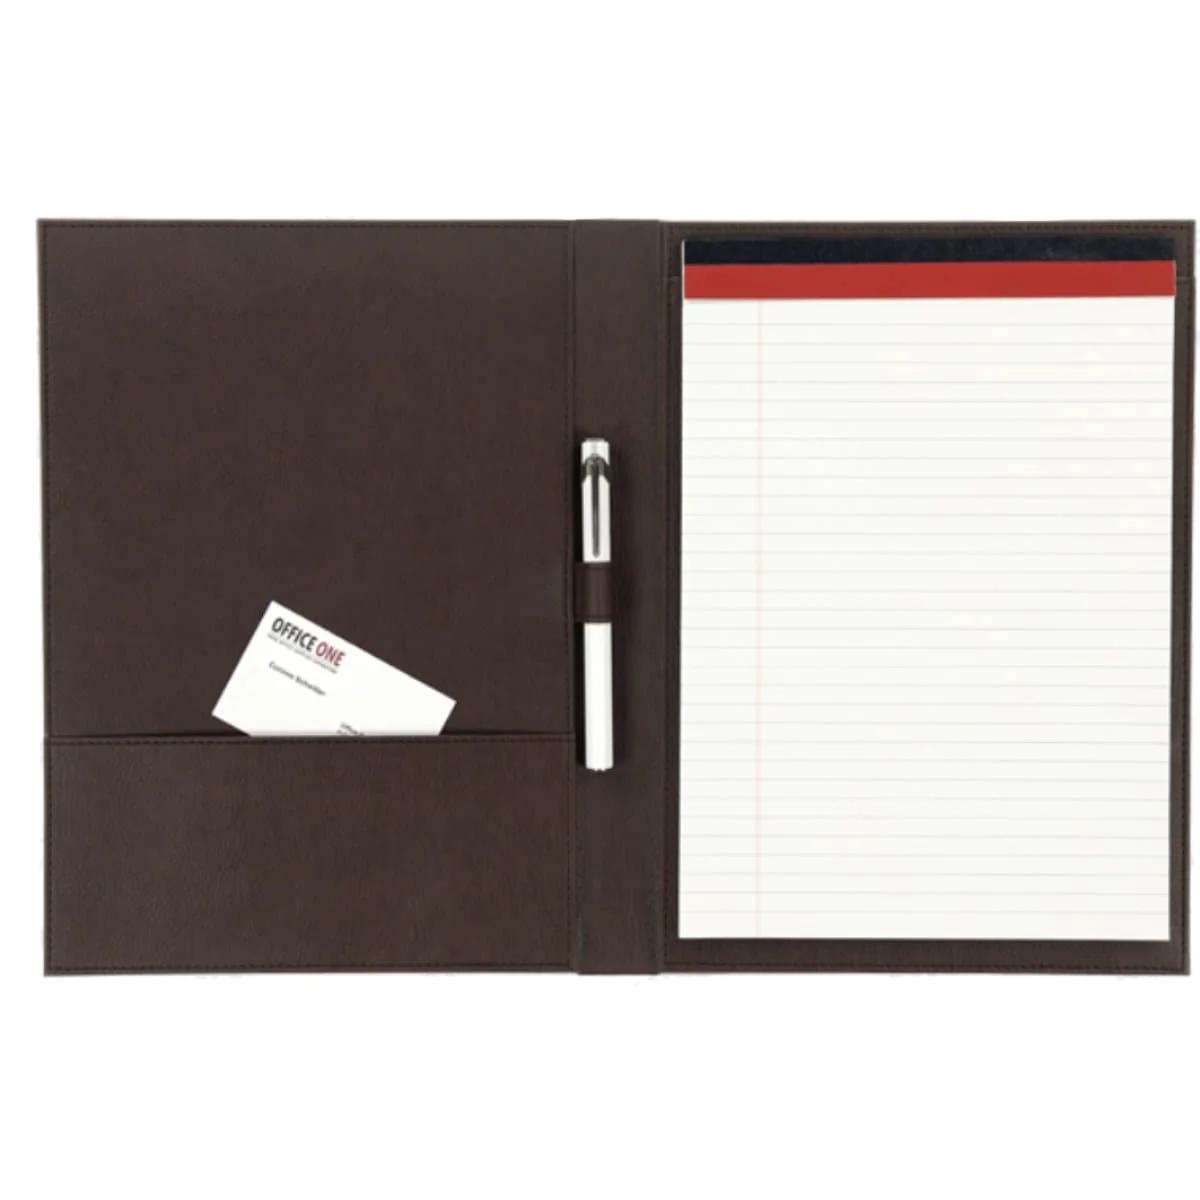 korean stationery online store office stationery suppliers in dubai biggest stationery shop in dubai stationery shop near me open